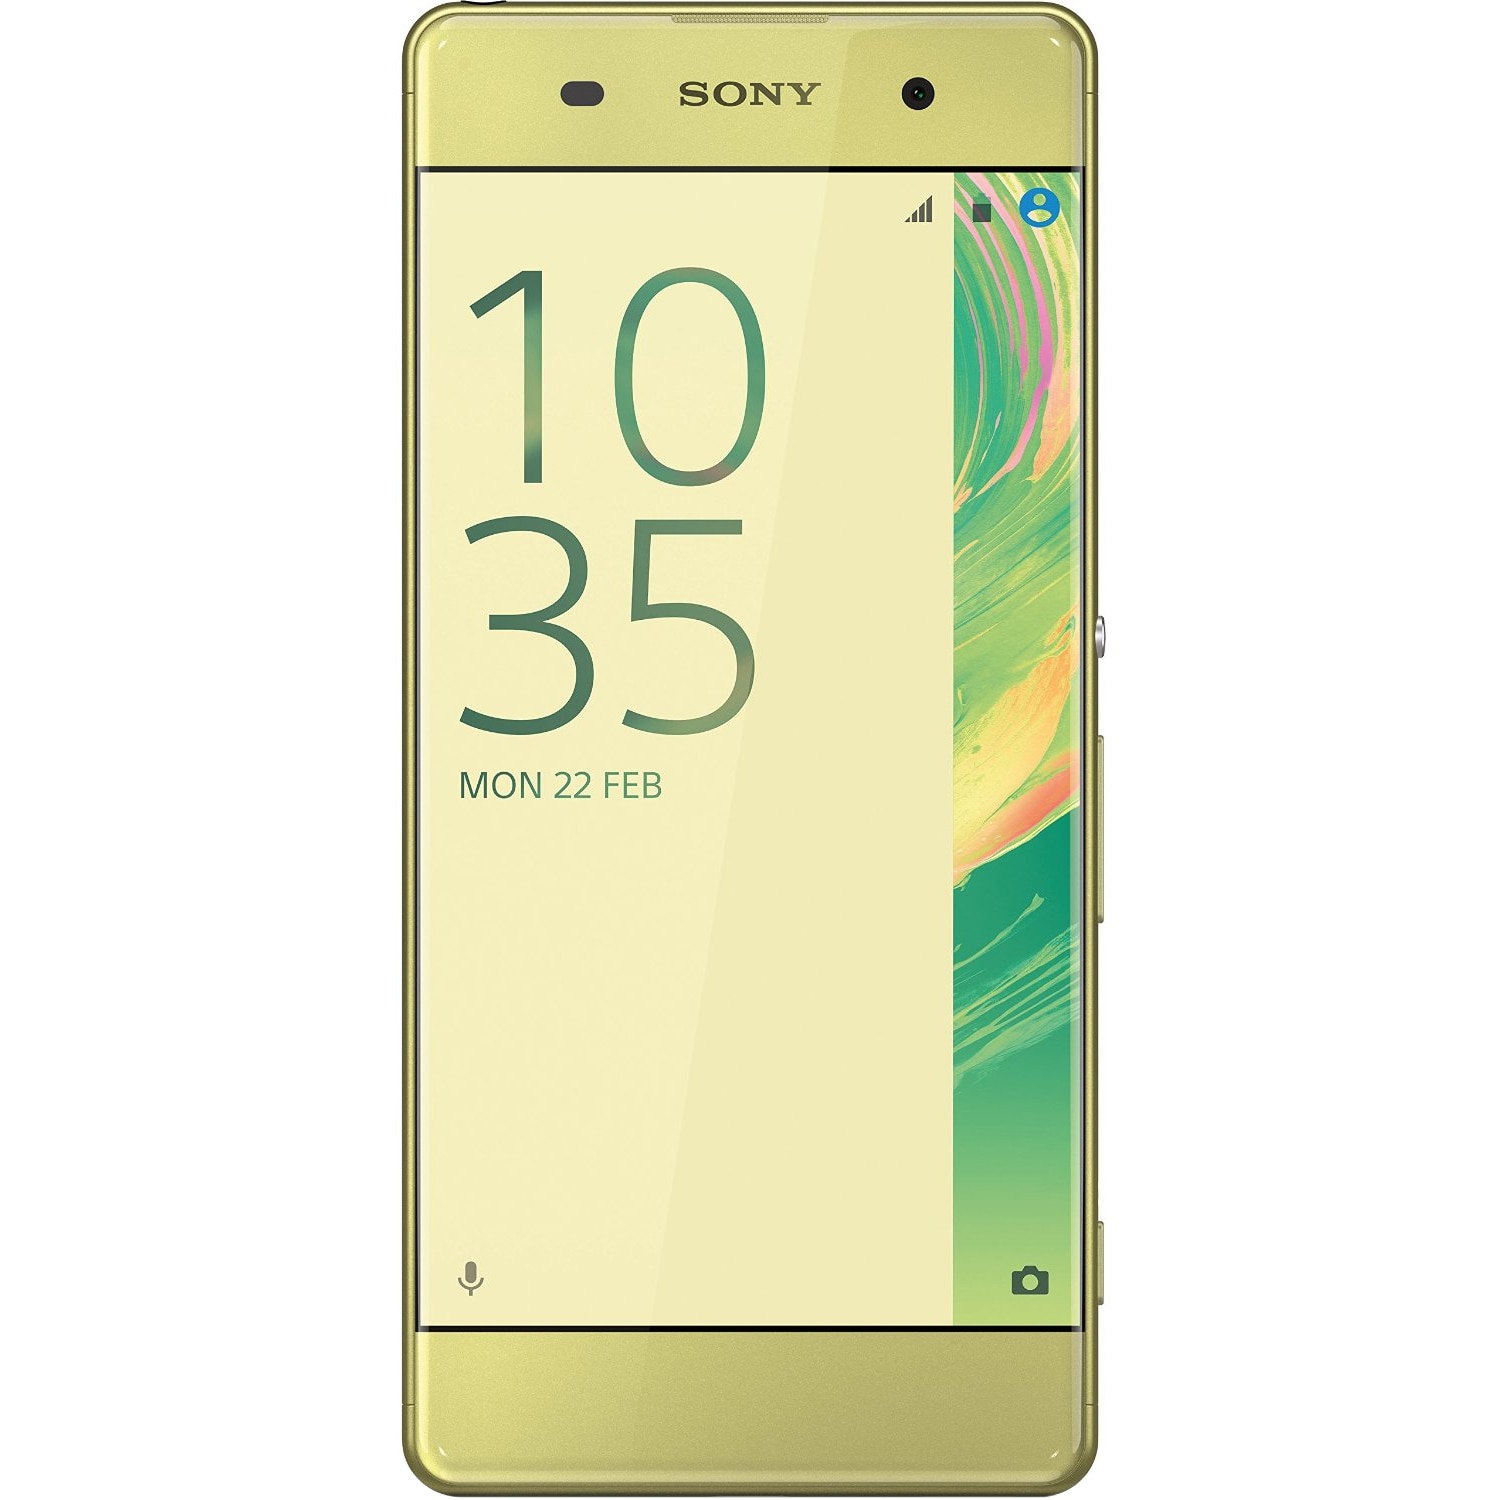 In other words competition microphone Telefon mobil Sony Xperia XA, 16GB, 4G, Lime Gold - eMAG.ro